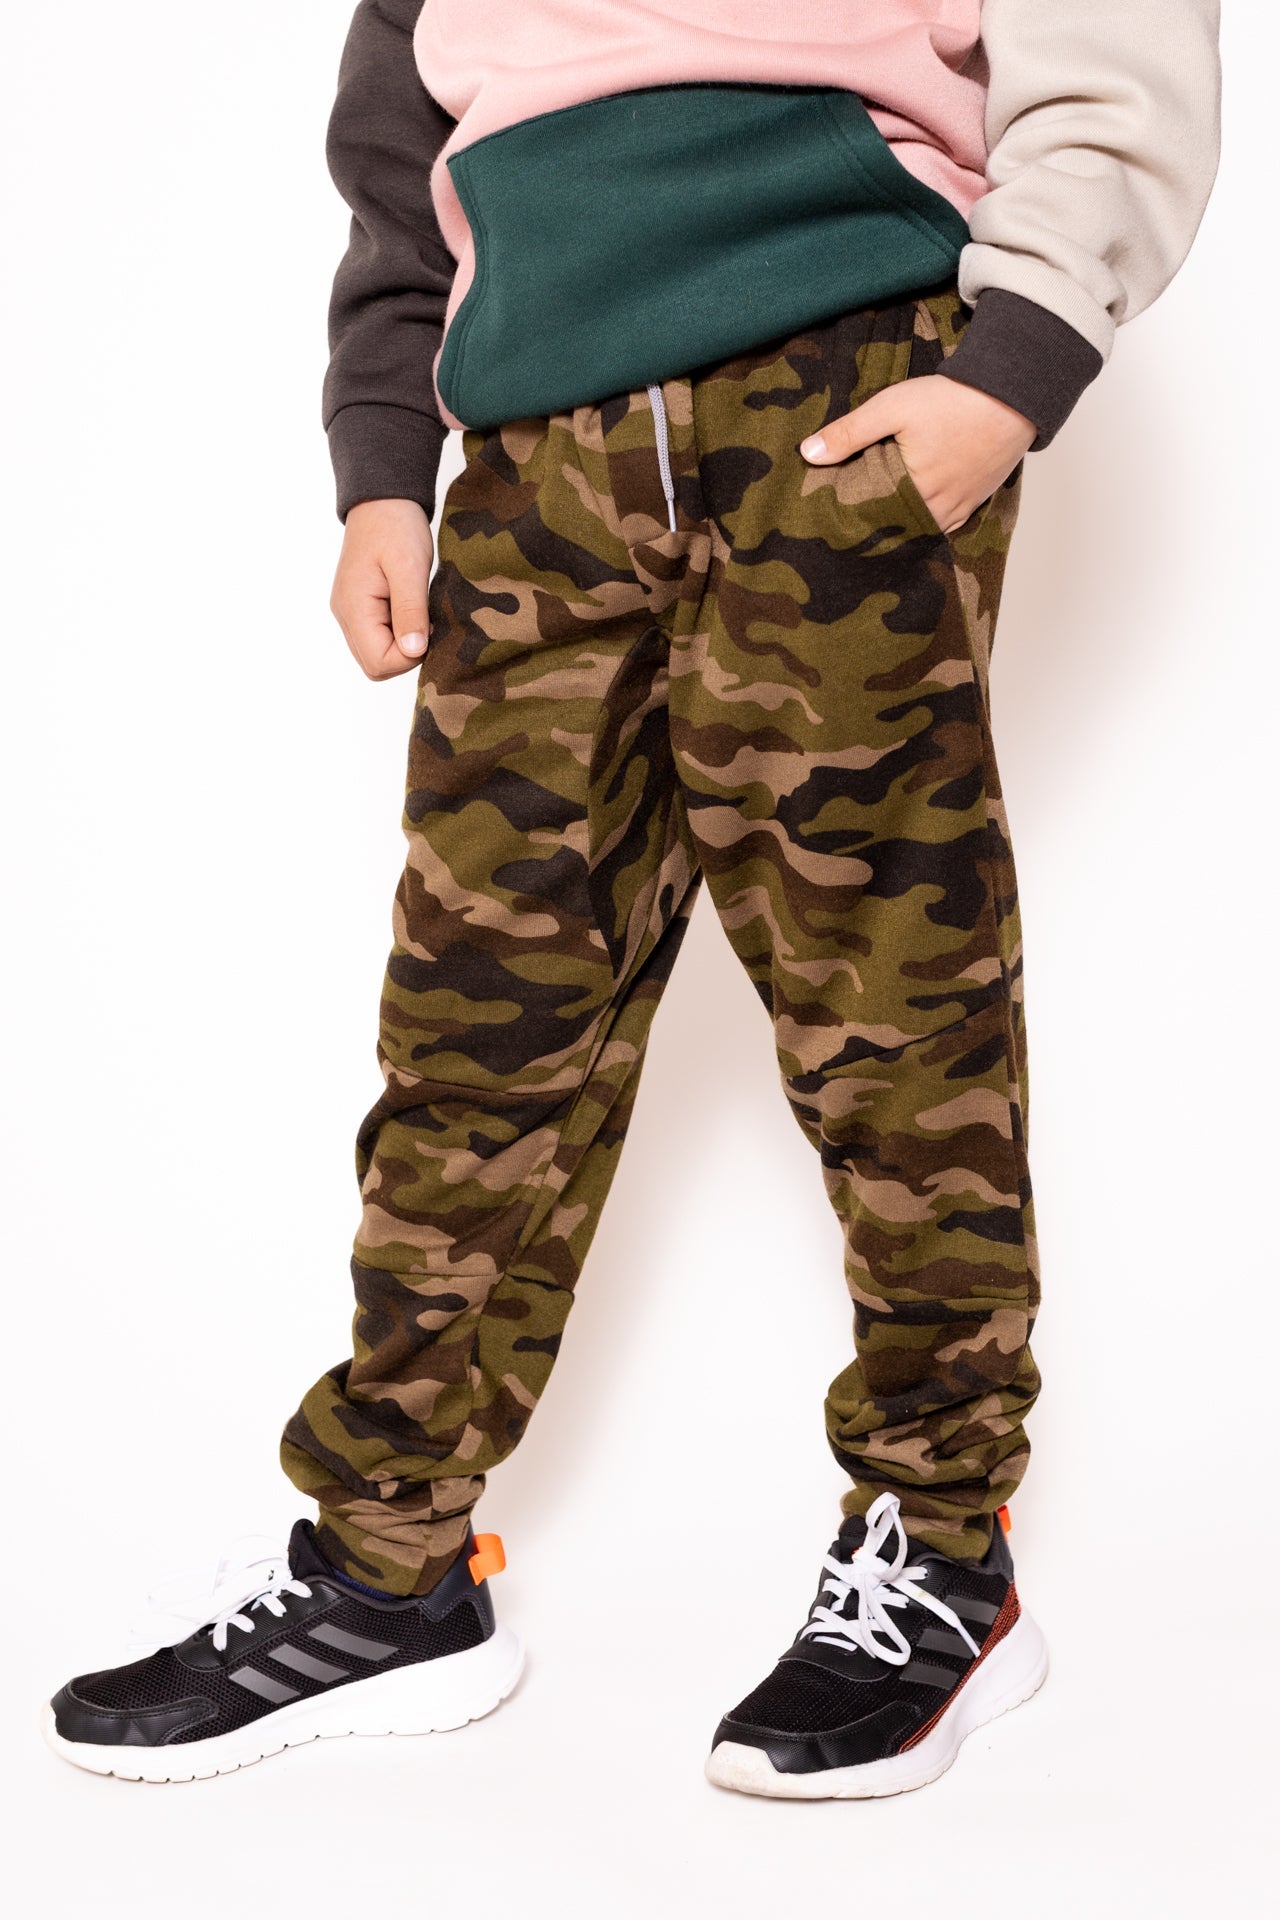 Kids Cool Affordable Camo Fleece Jogger by Brooklyn Cloth